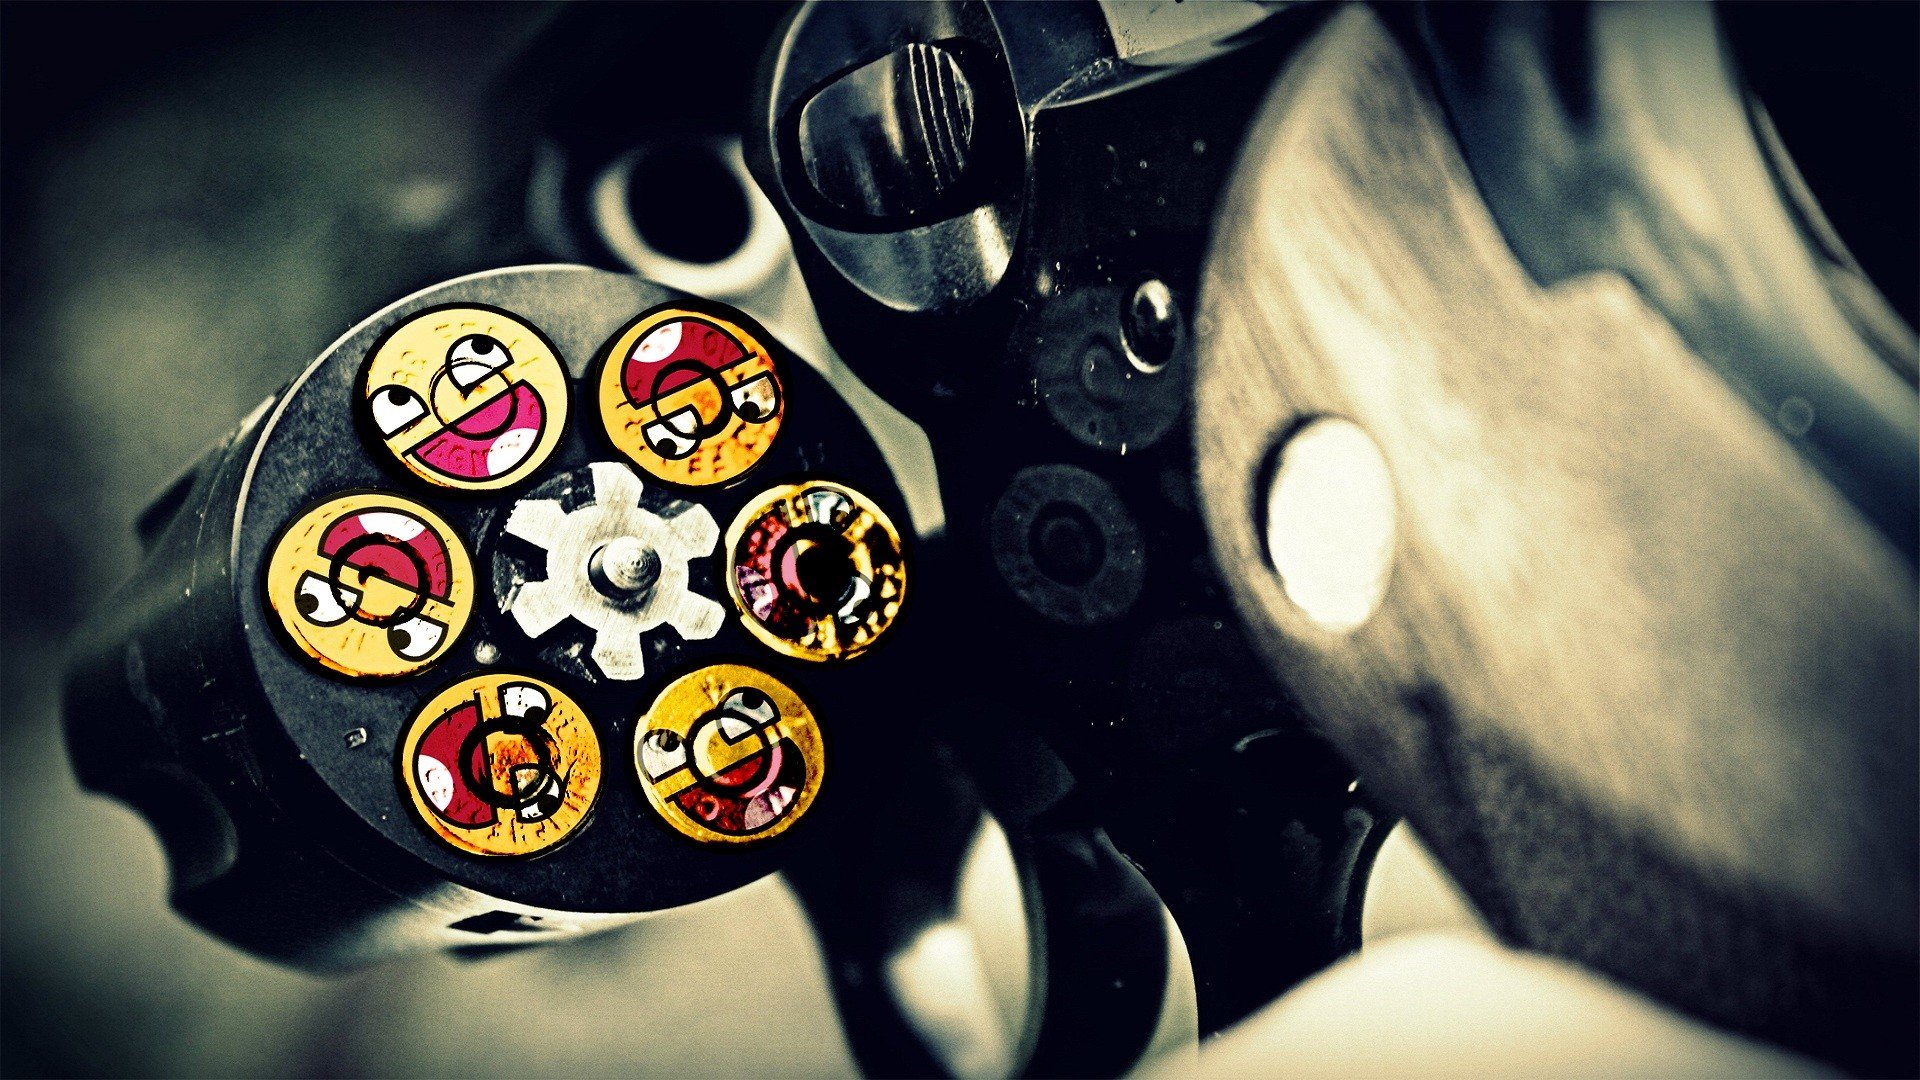 Guns Ammunition Smiley Face Awesome Wallpaper